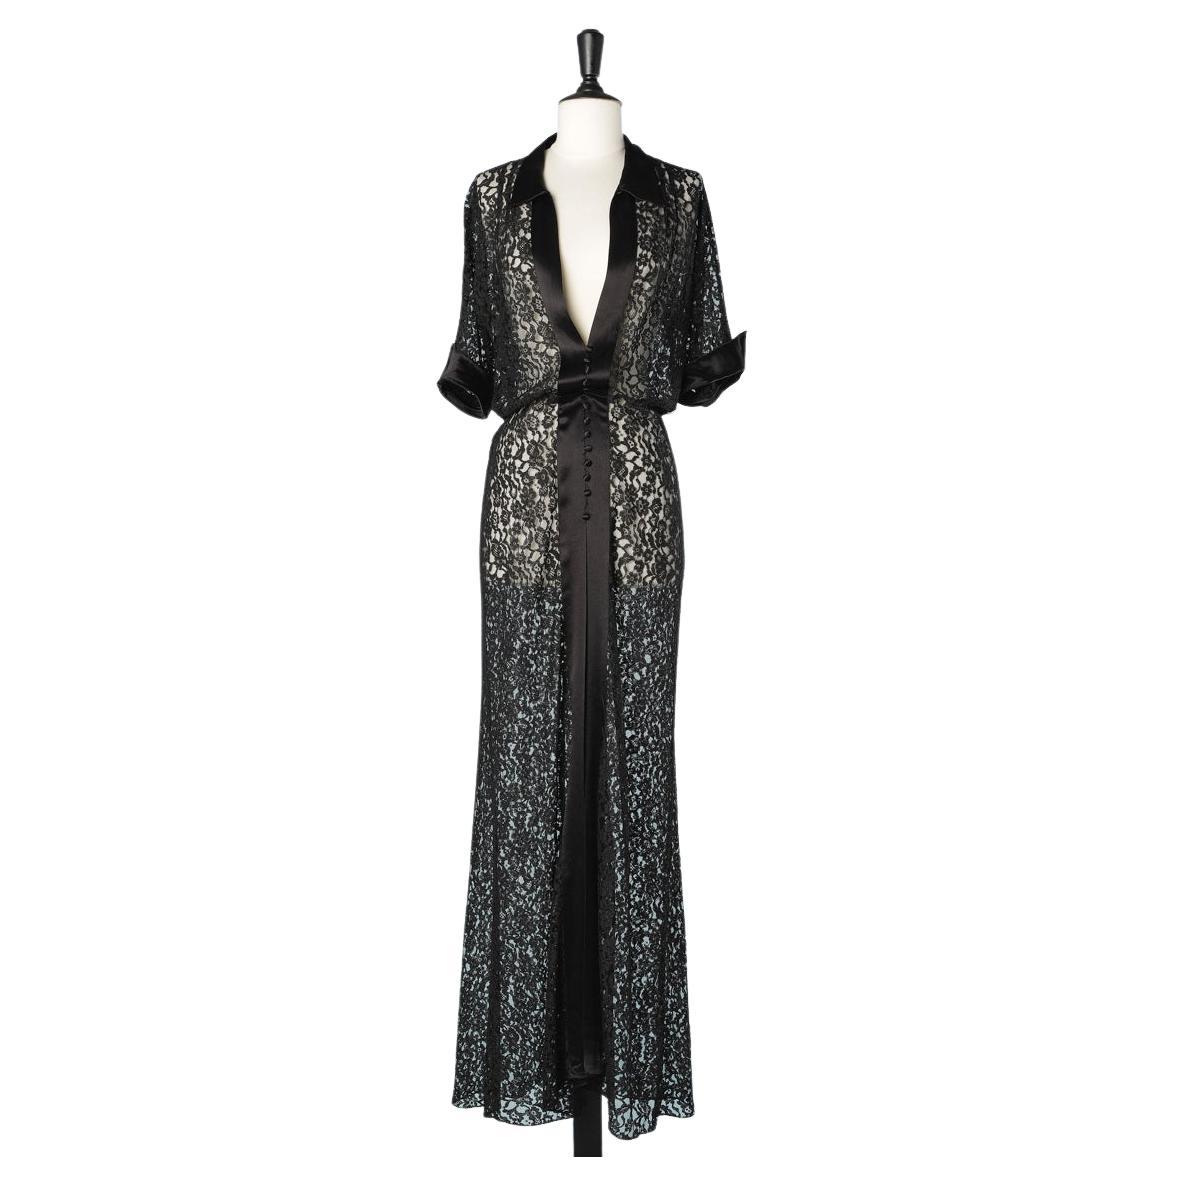 Evening coat in black lace with black silk satin edge and collar Circa 1930's 